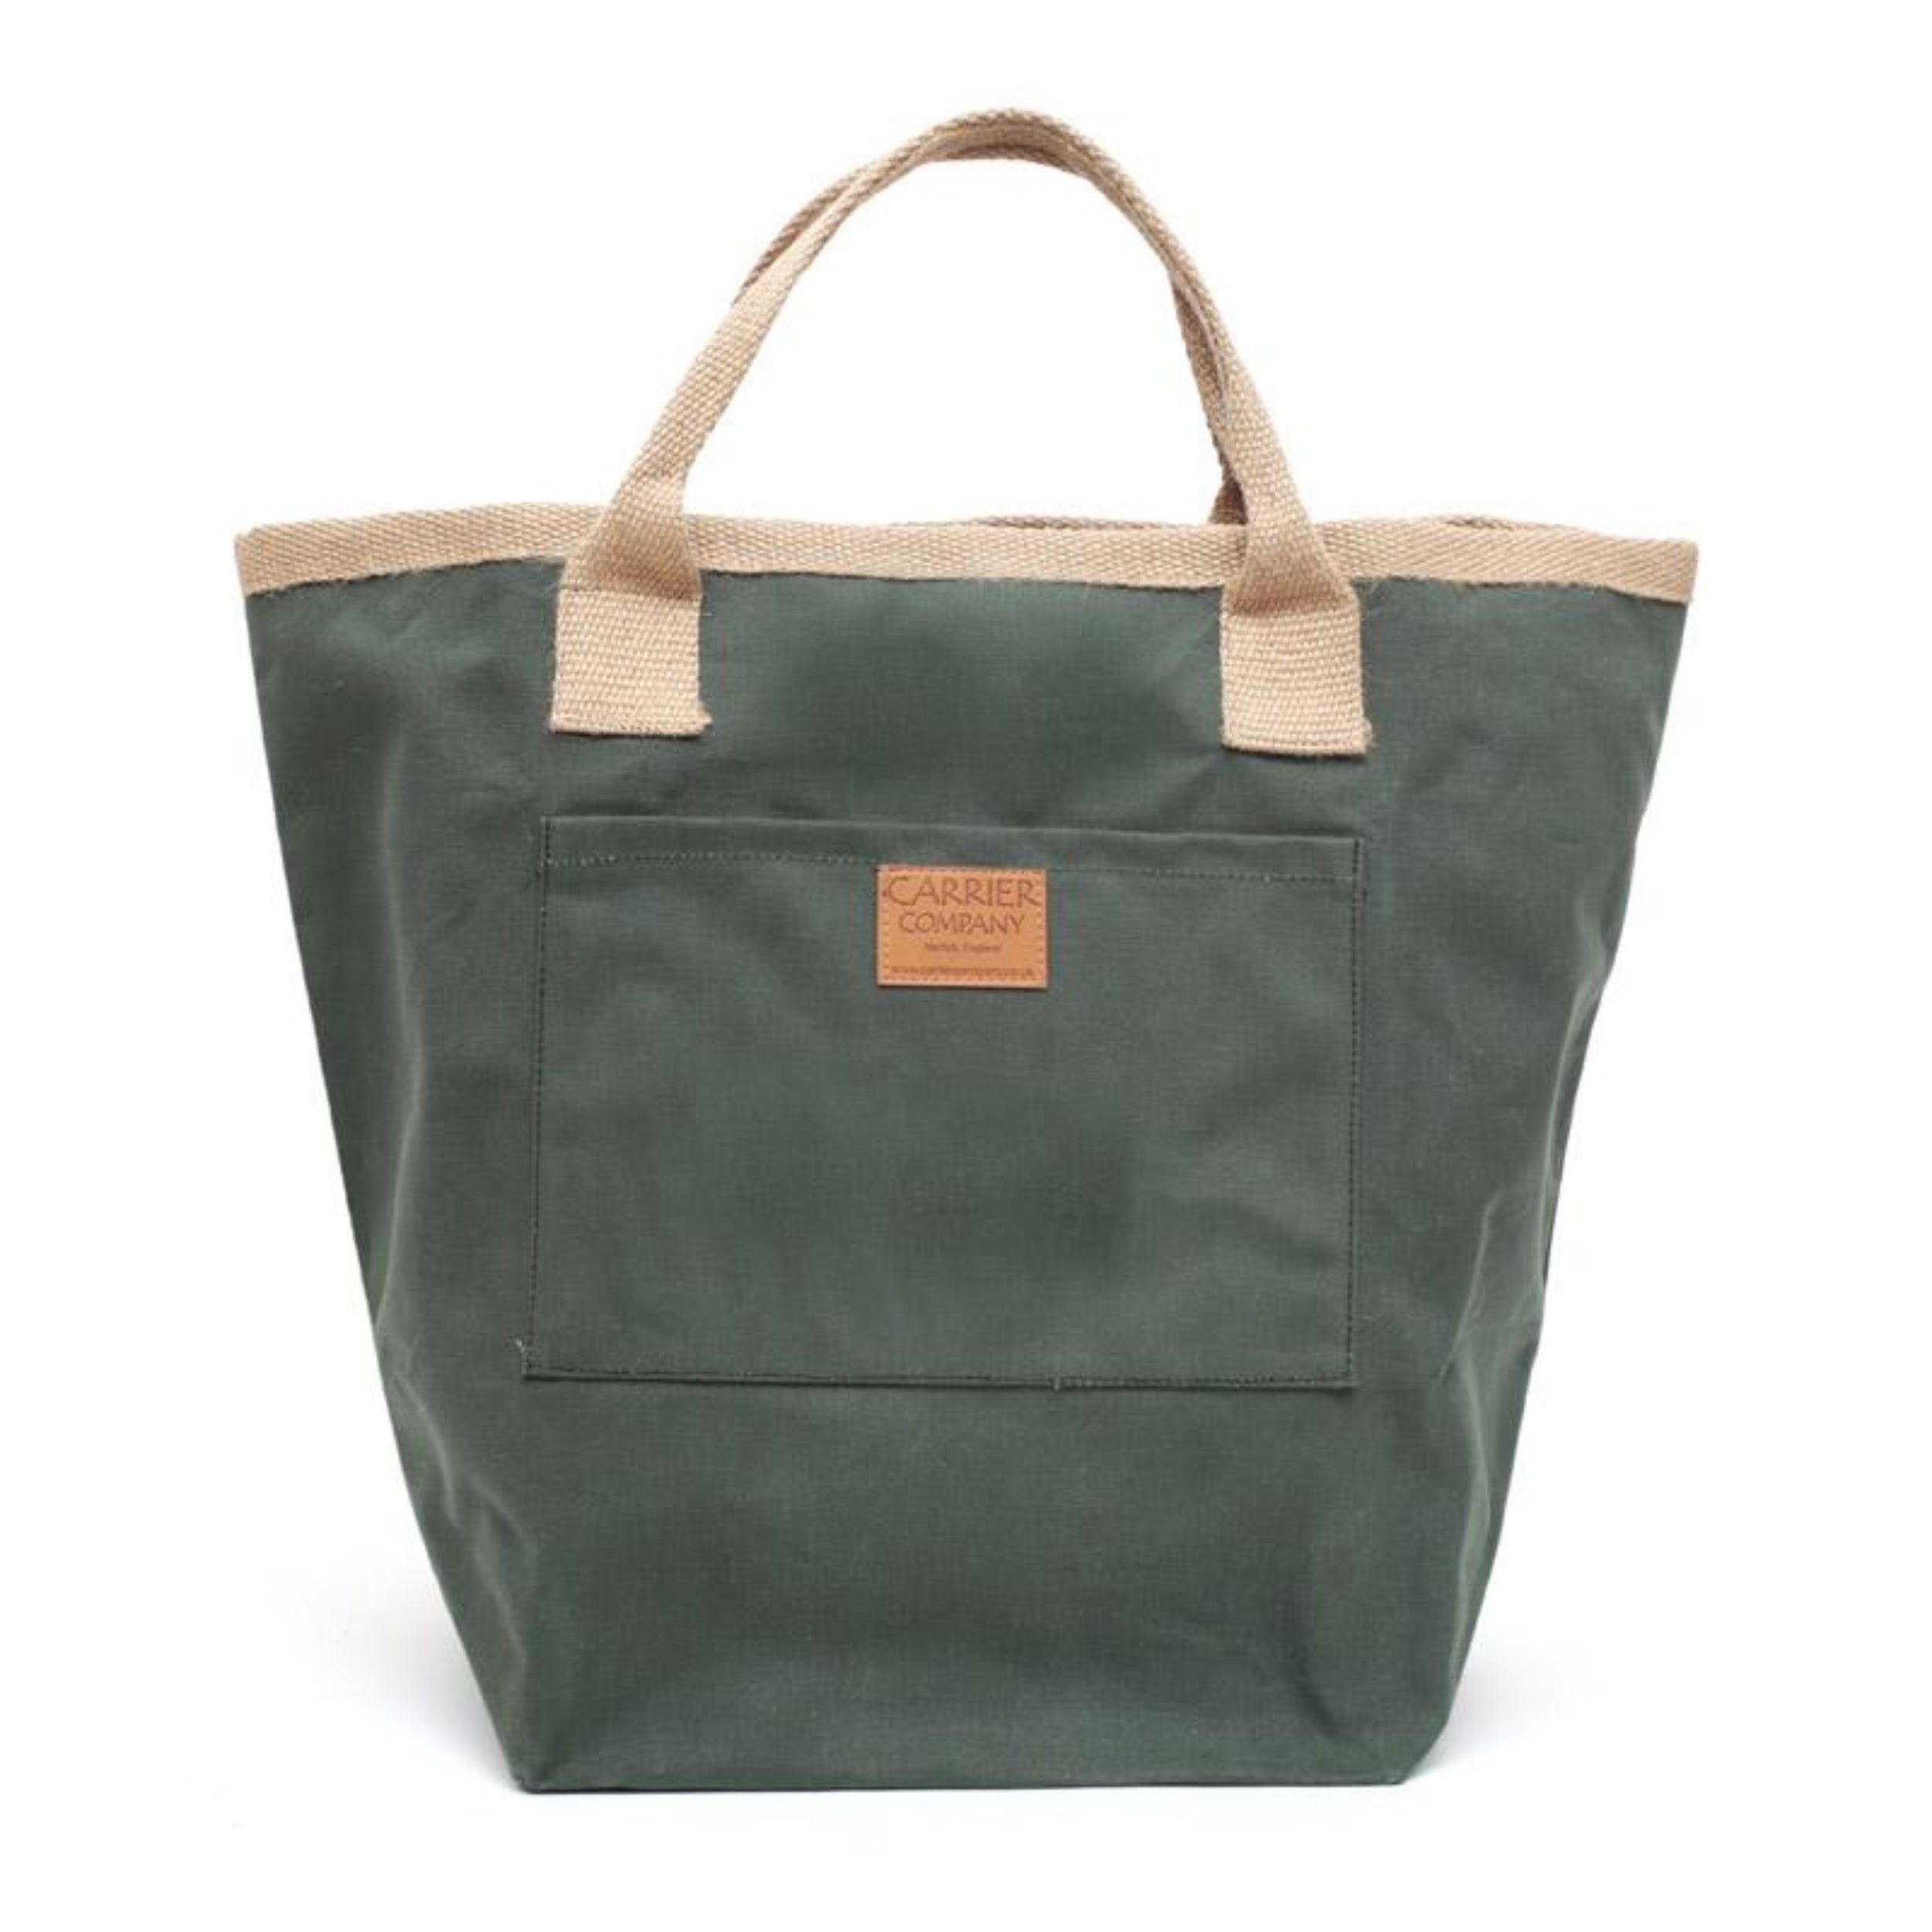 Carrier Company loot & Boot Bag with Jute Handles